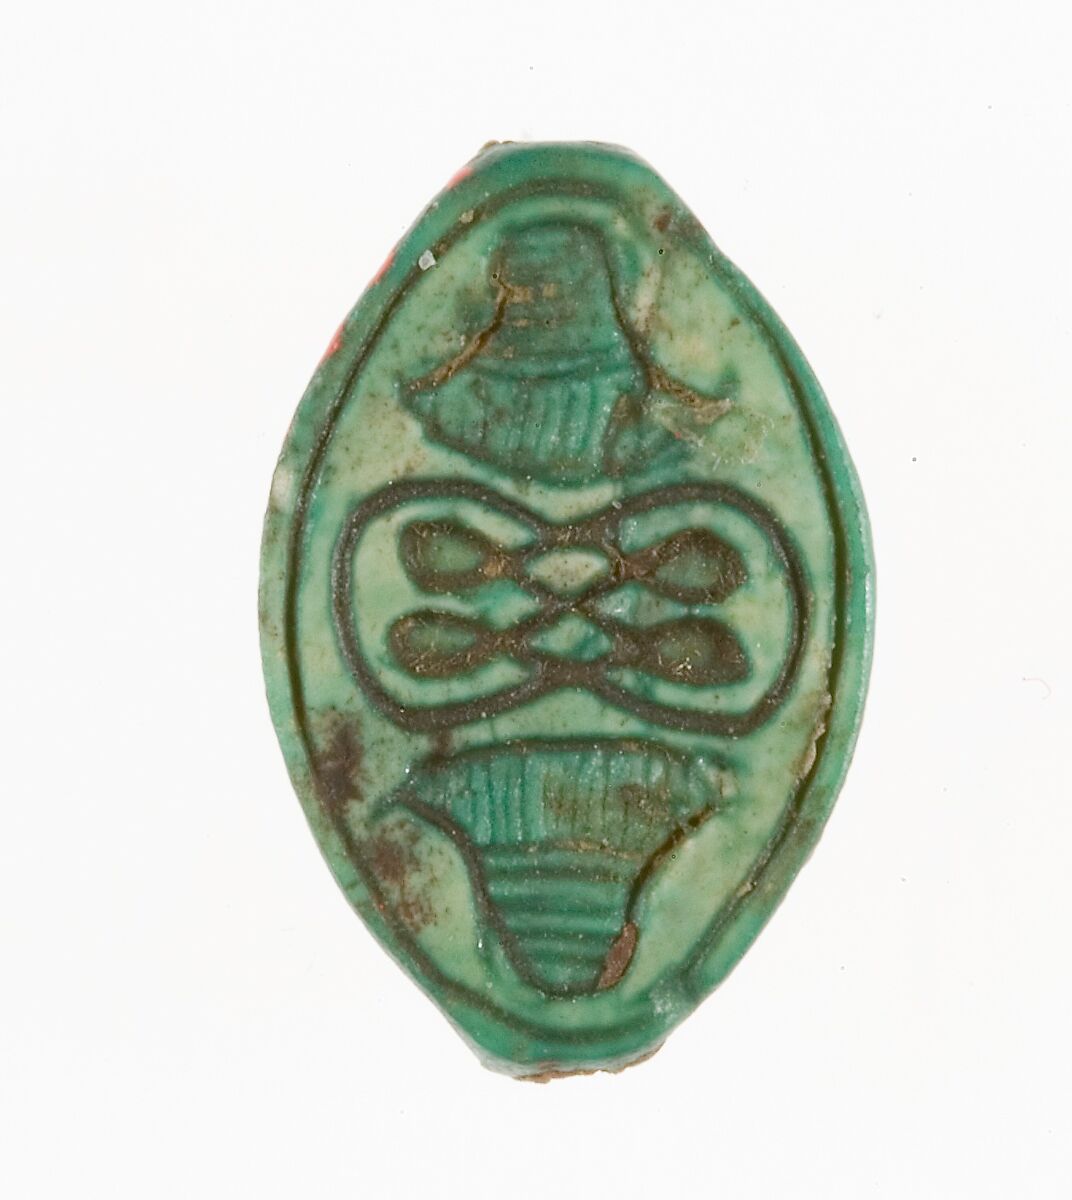 Cowroid Seal Amulet Inscribed with a Geometric Pattern, Steatite (glazed) 